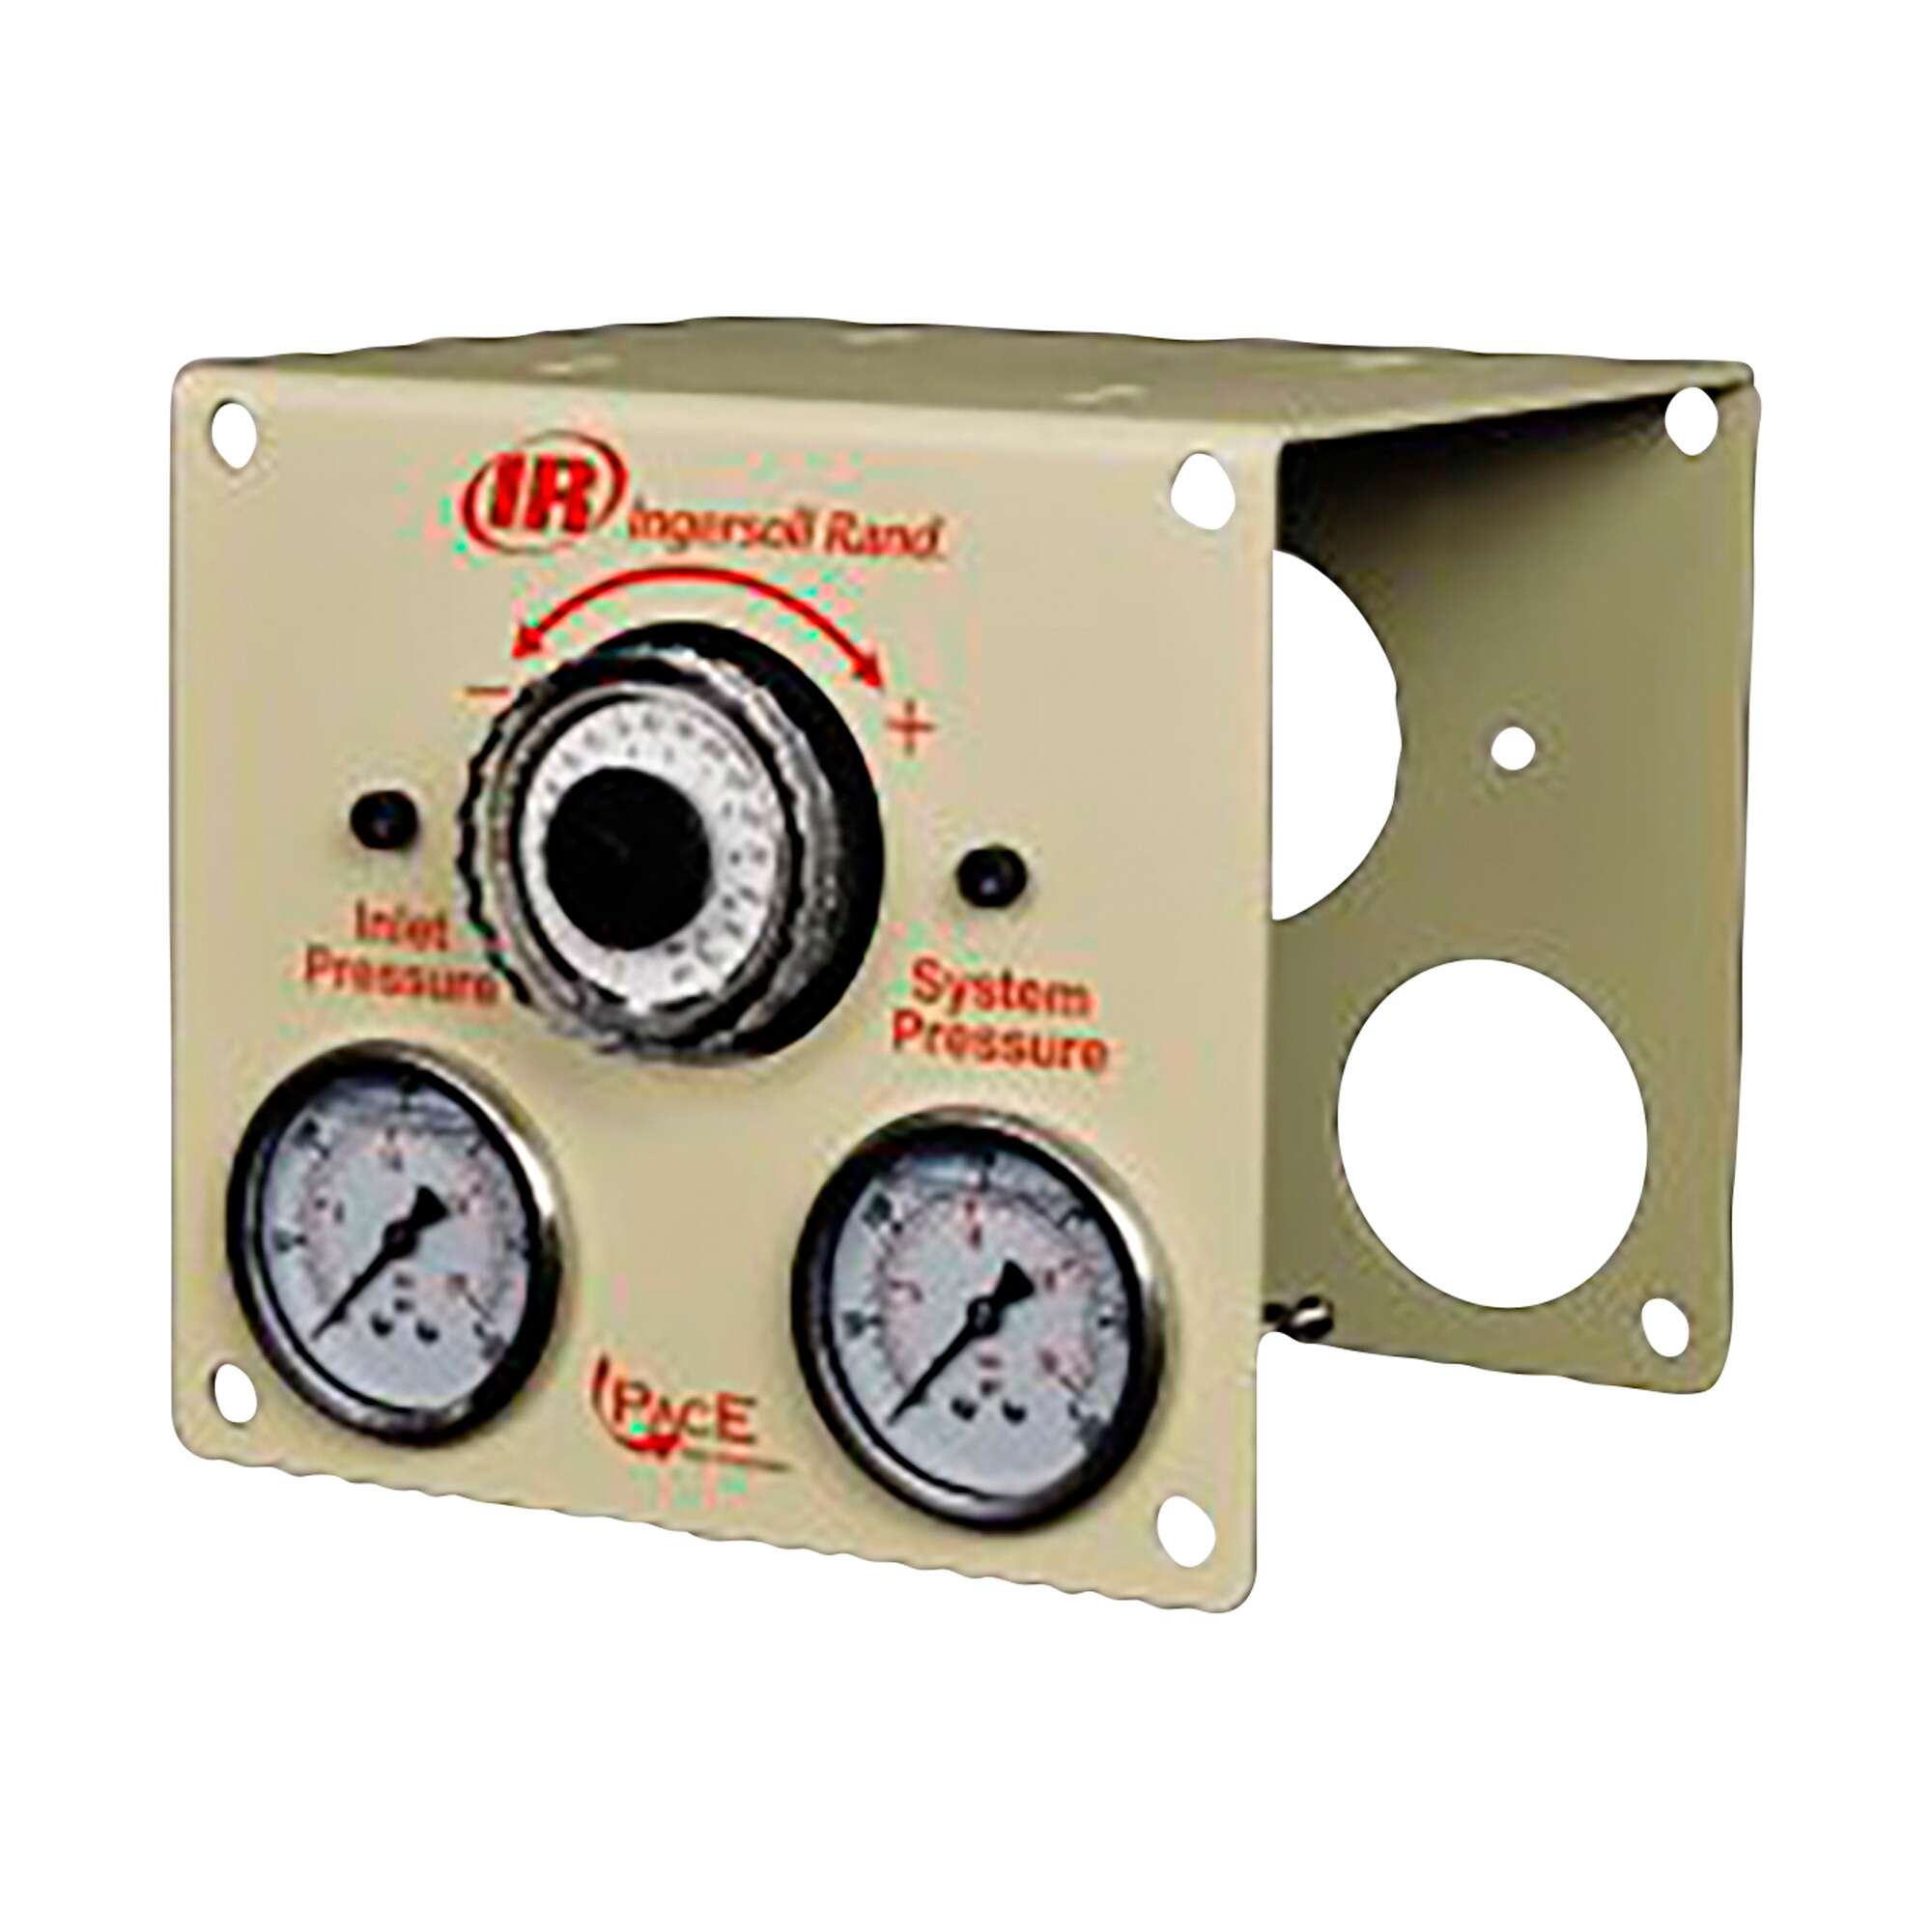 Ingersoll Rand PacE Flow Controller 1/2in NPT Left To Right Flow